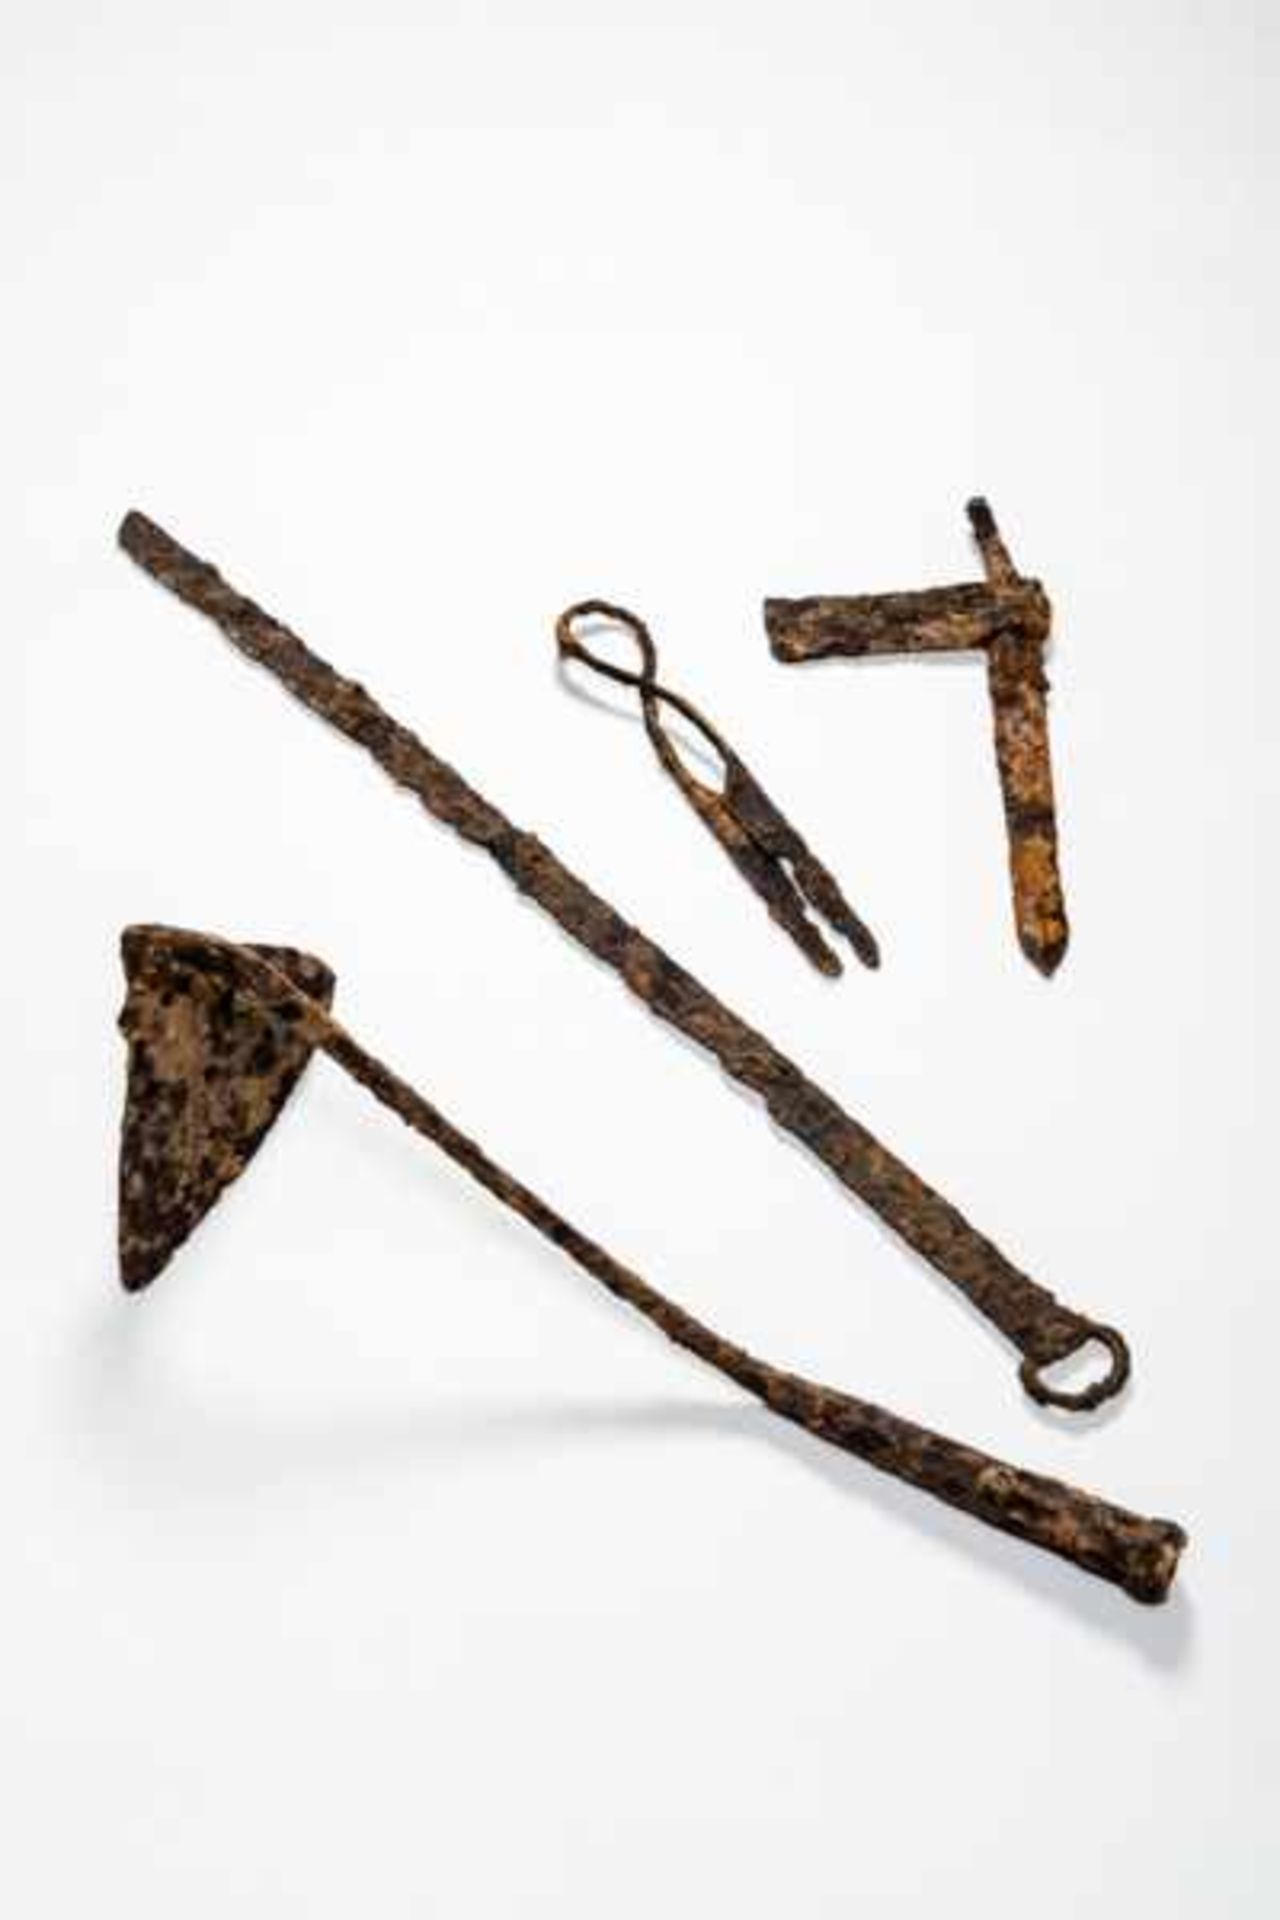 RARE COLLECTION OF IRON TOOLS Iron. China, ca. Han dynasty, 206 BCE - 220 CE,to Northern Wei dynasty - Bild 2 aus 3